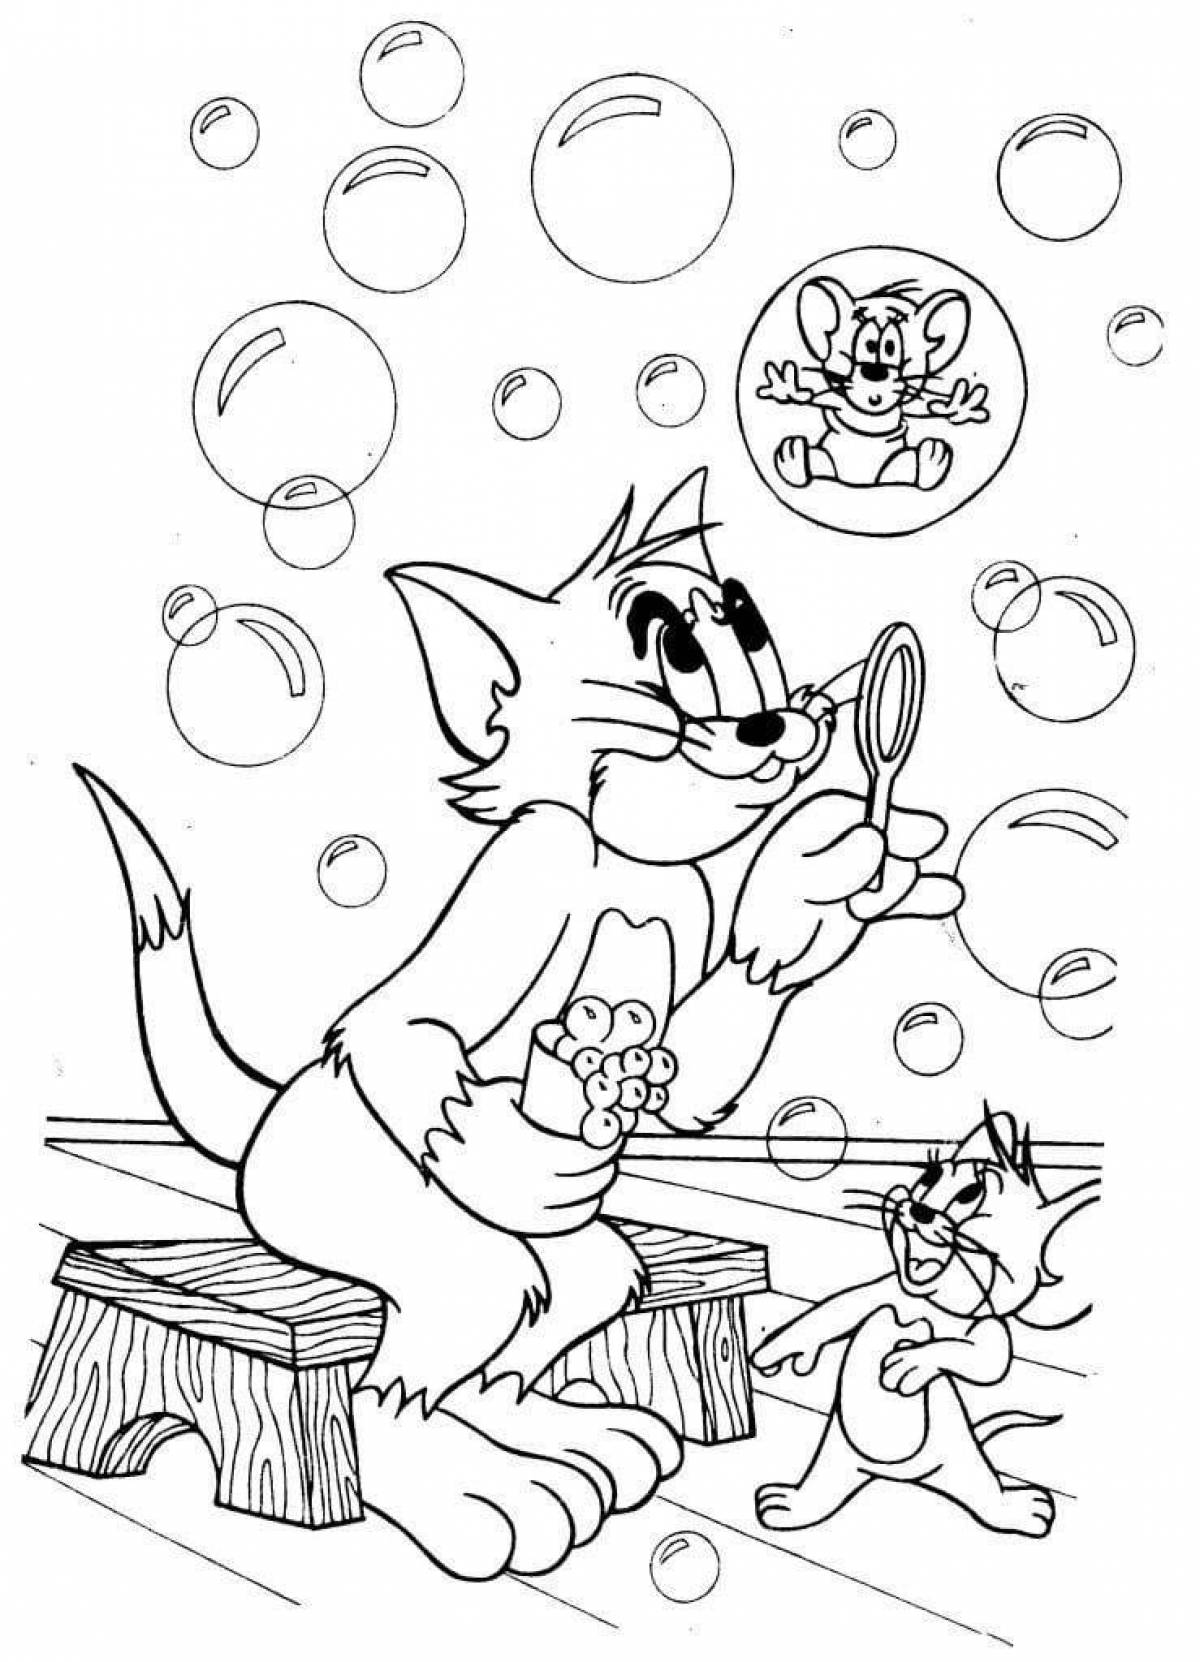 Cute tom and jerry coloring pages for kids